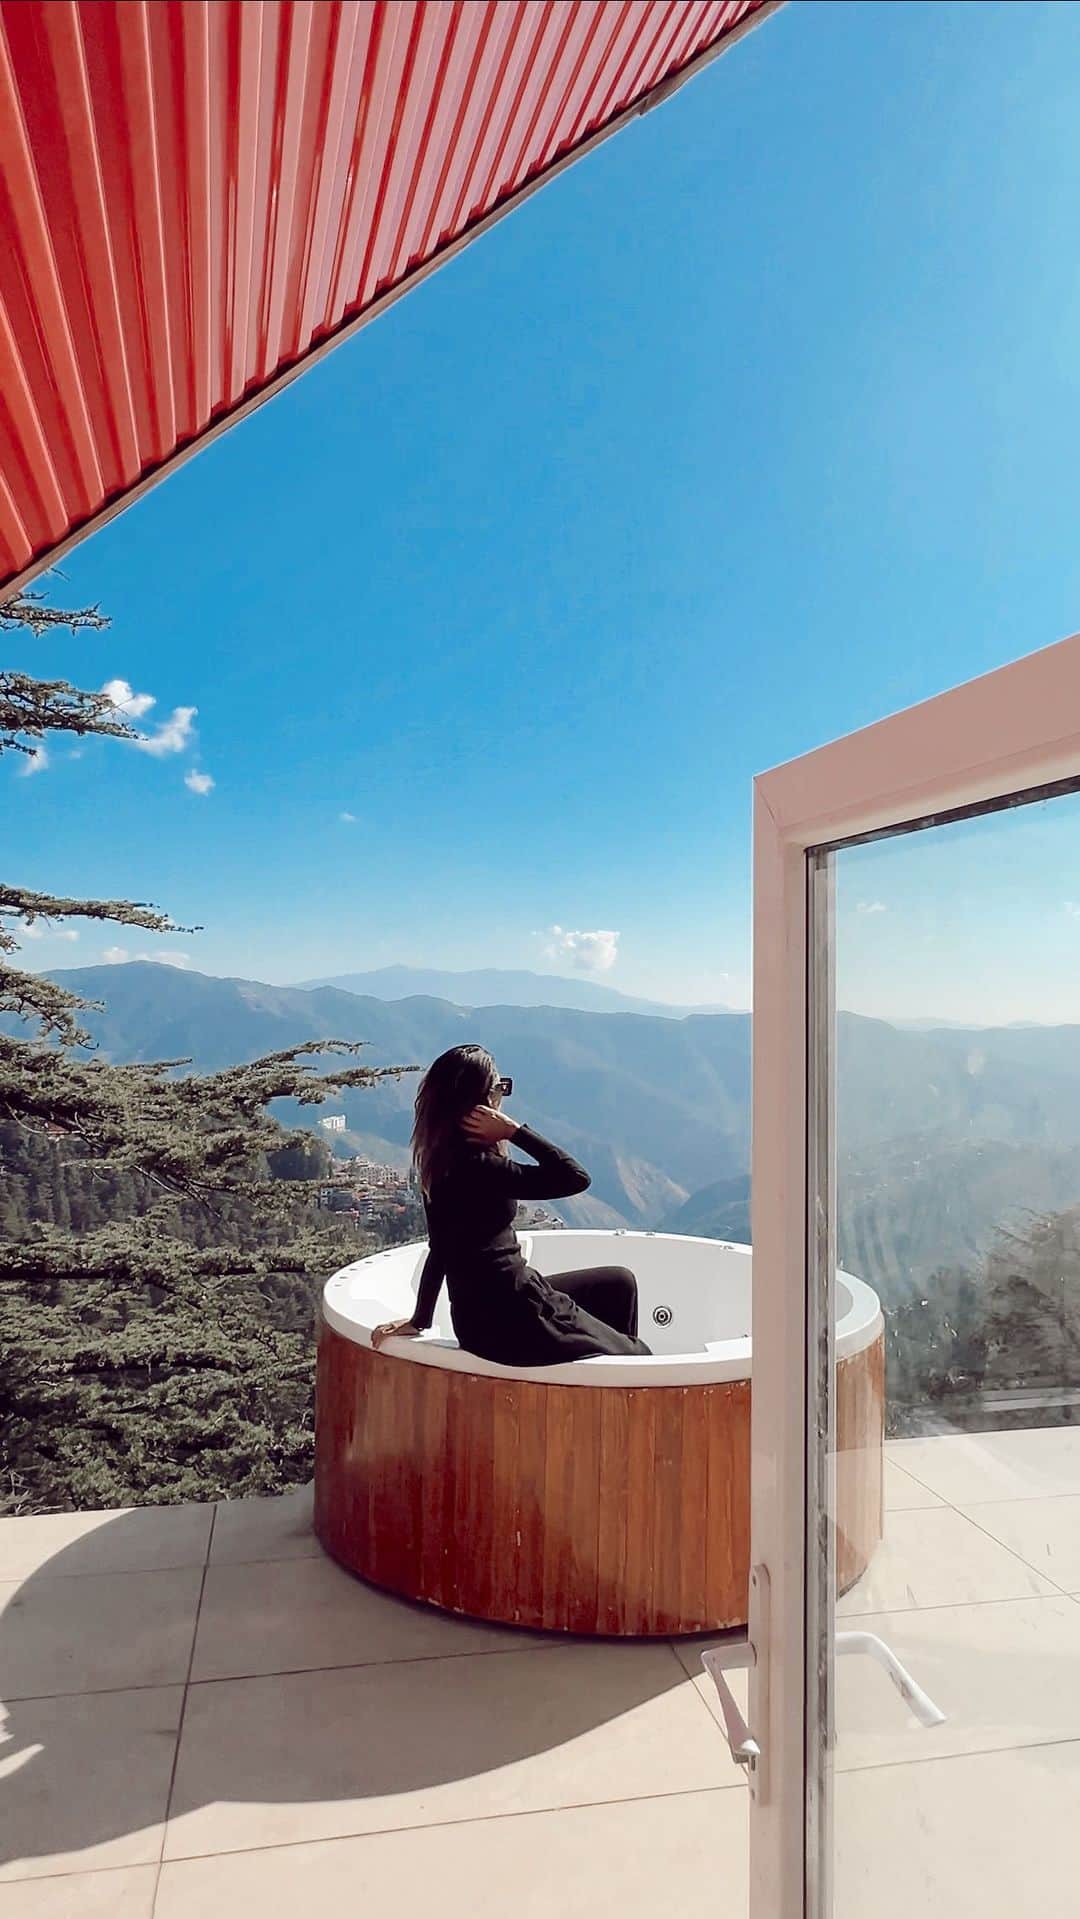 Aakriti Ranaのインスタグラム：「Watch till the end for the final result!  A hot tub with this view was all that I wanted. All thanks to dad, he made it happen! It’s not easy to build a house in the mountains and he’s doing a fab job with all his ideas and hacks! The hot tub guys gave up and refused to put it on the top. It couldn’t go through the house so we had to do this jugaad.   Now you know why we didn’t get the railing on the roof done. It’ll be done now so none of you would fall when you visit our place haha.   #aakritirana #himachal #hottub #mounatains #mountainview #reelsinstagram #diy #doityourself #shimla #himachal」